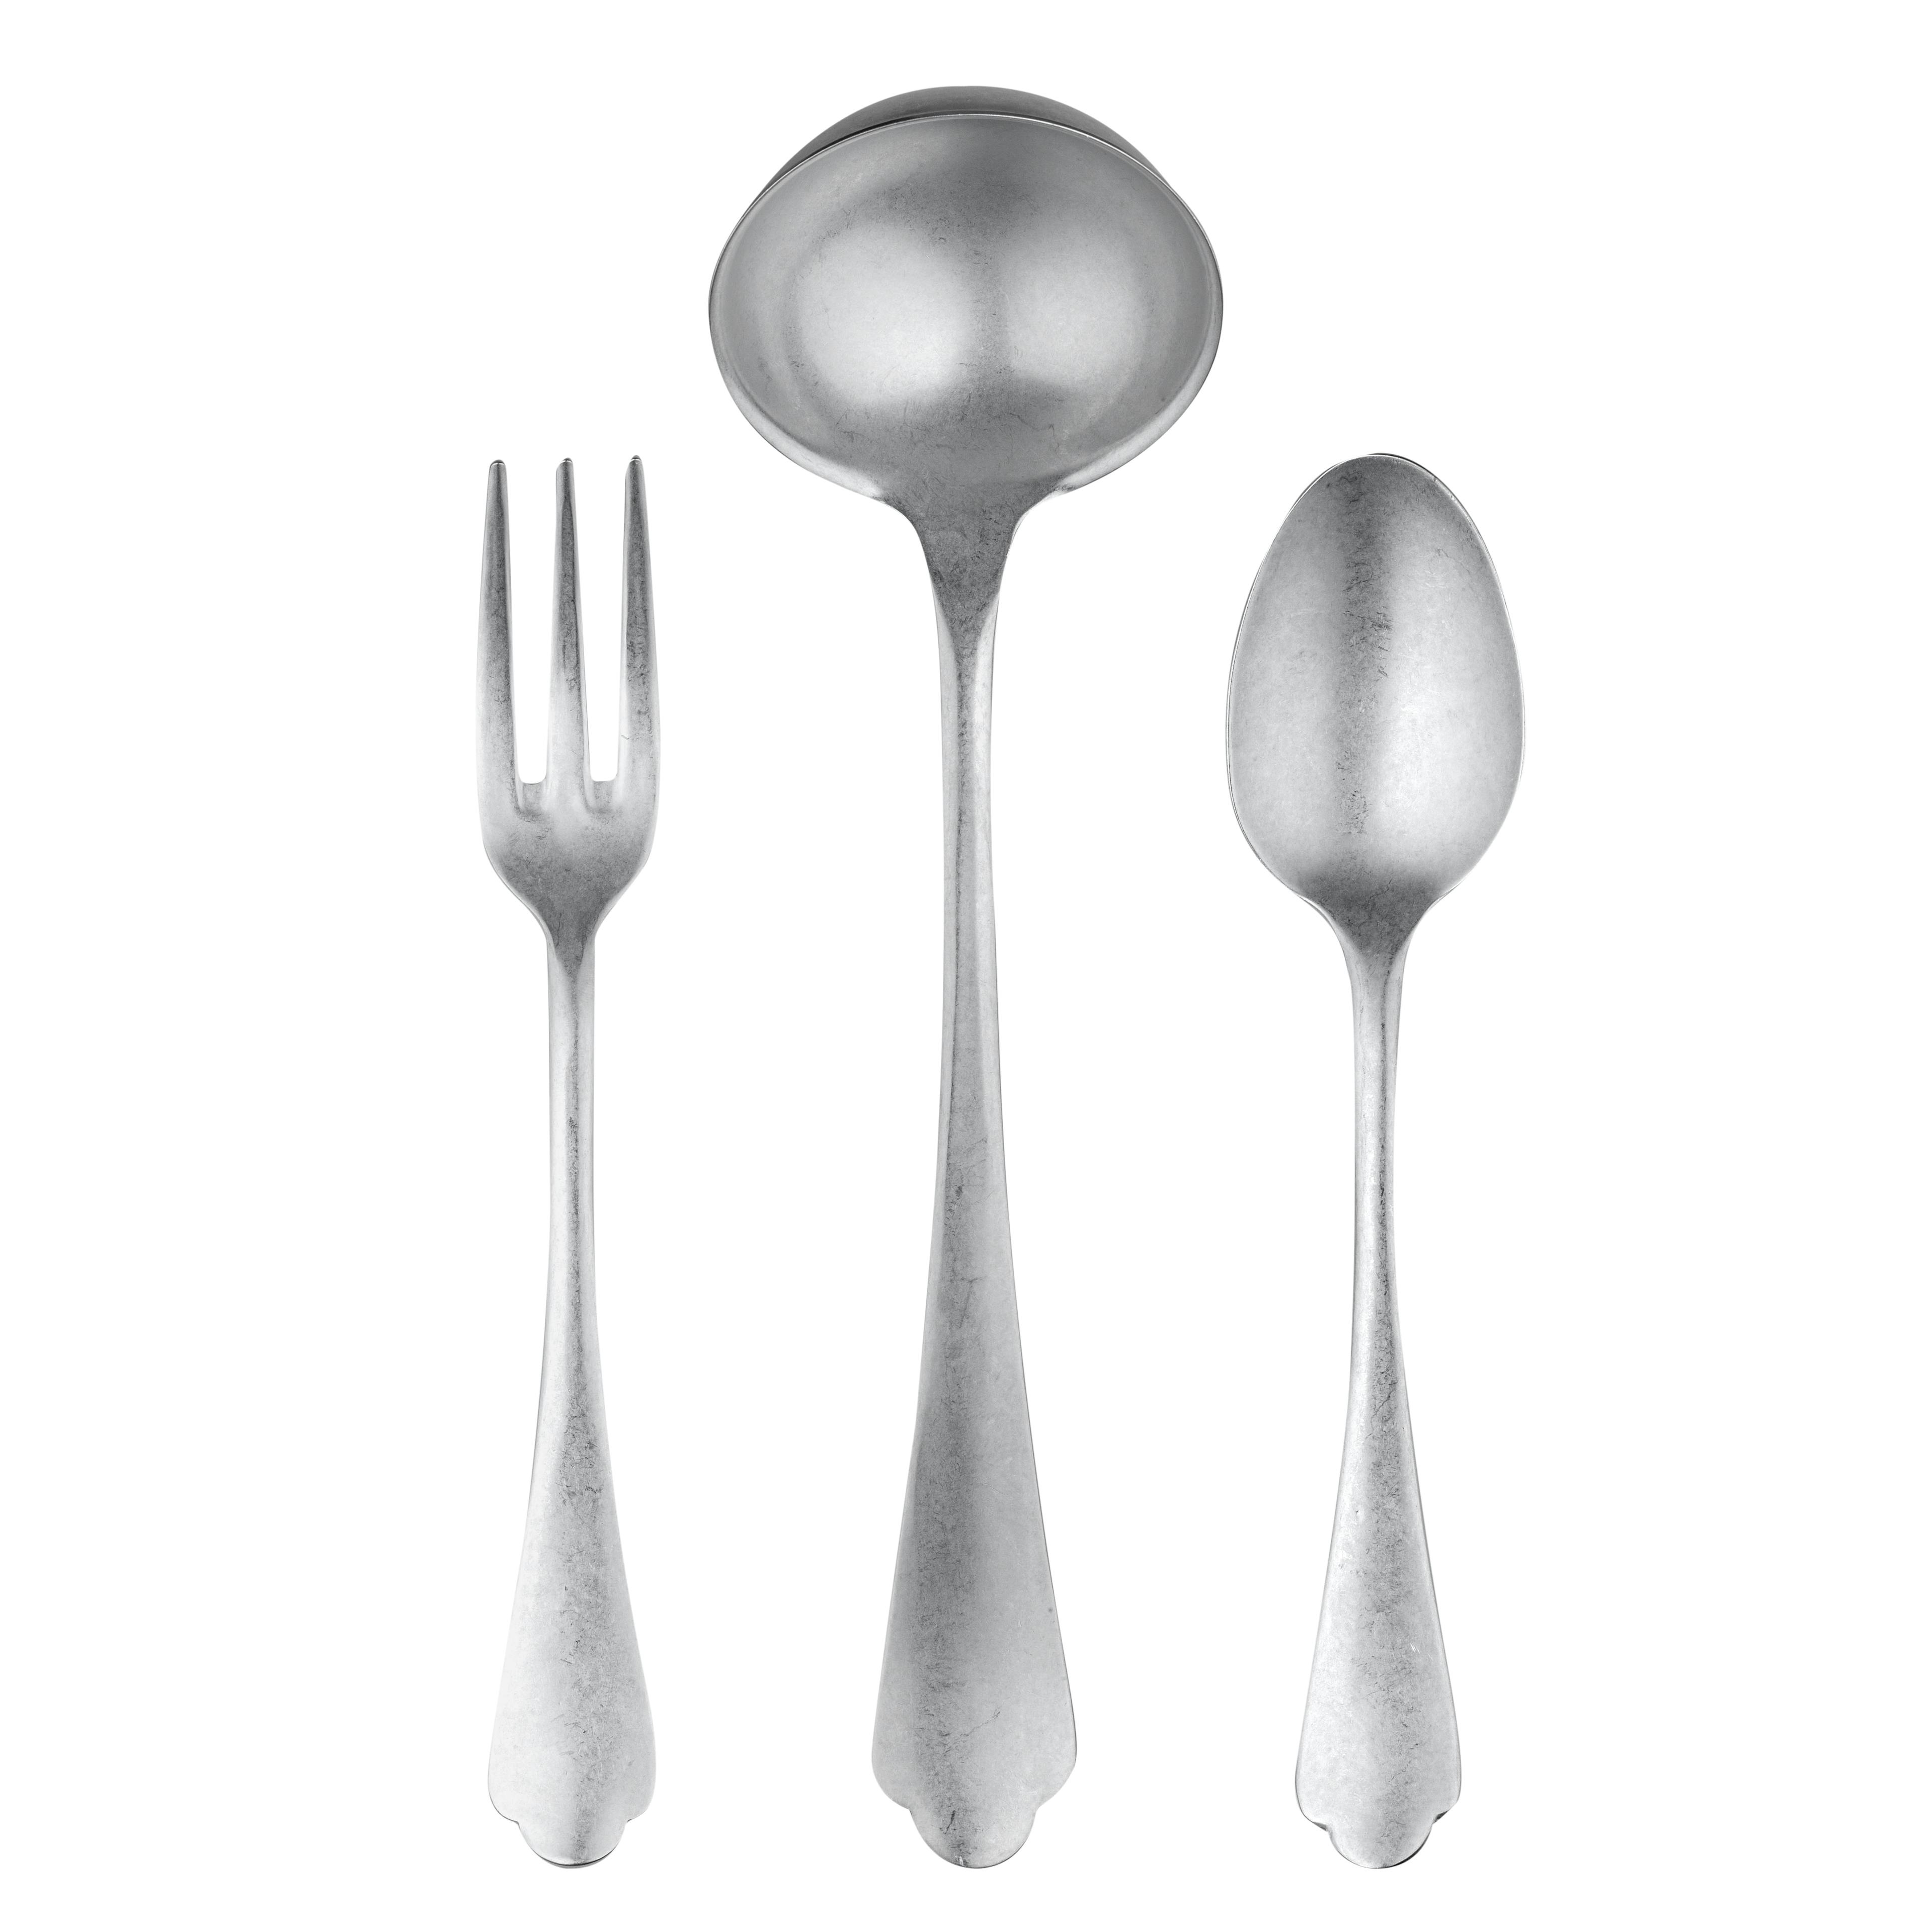 Elegant 3-Piece Stainless Steel Hostess Set for Sophisticated Dining